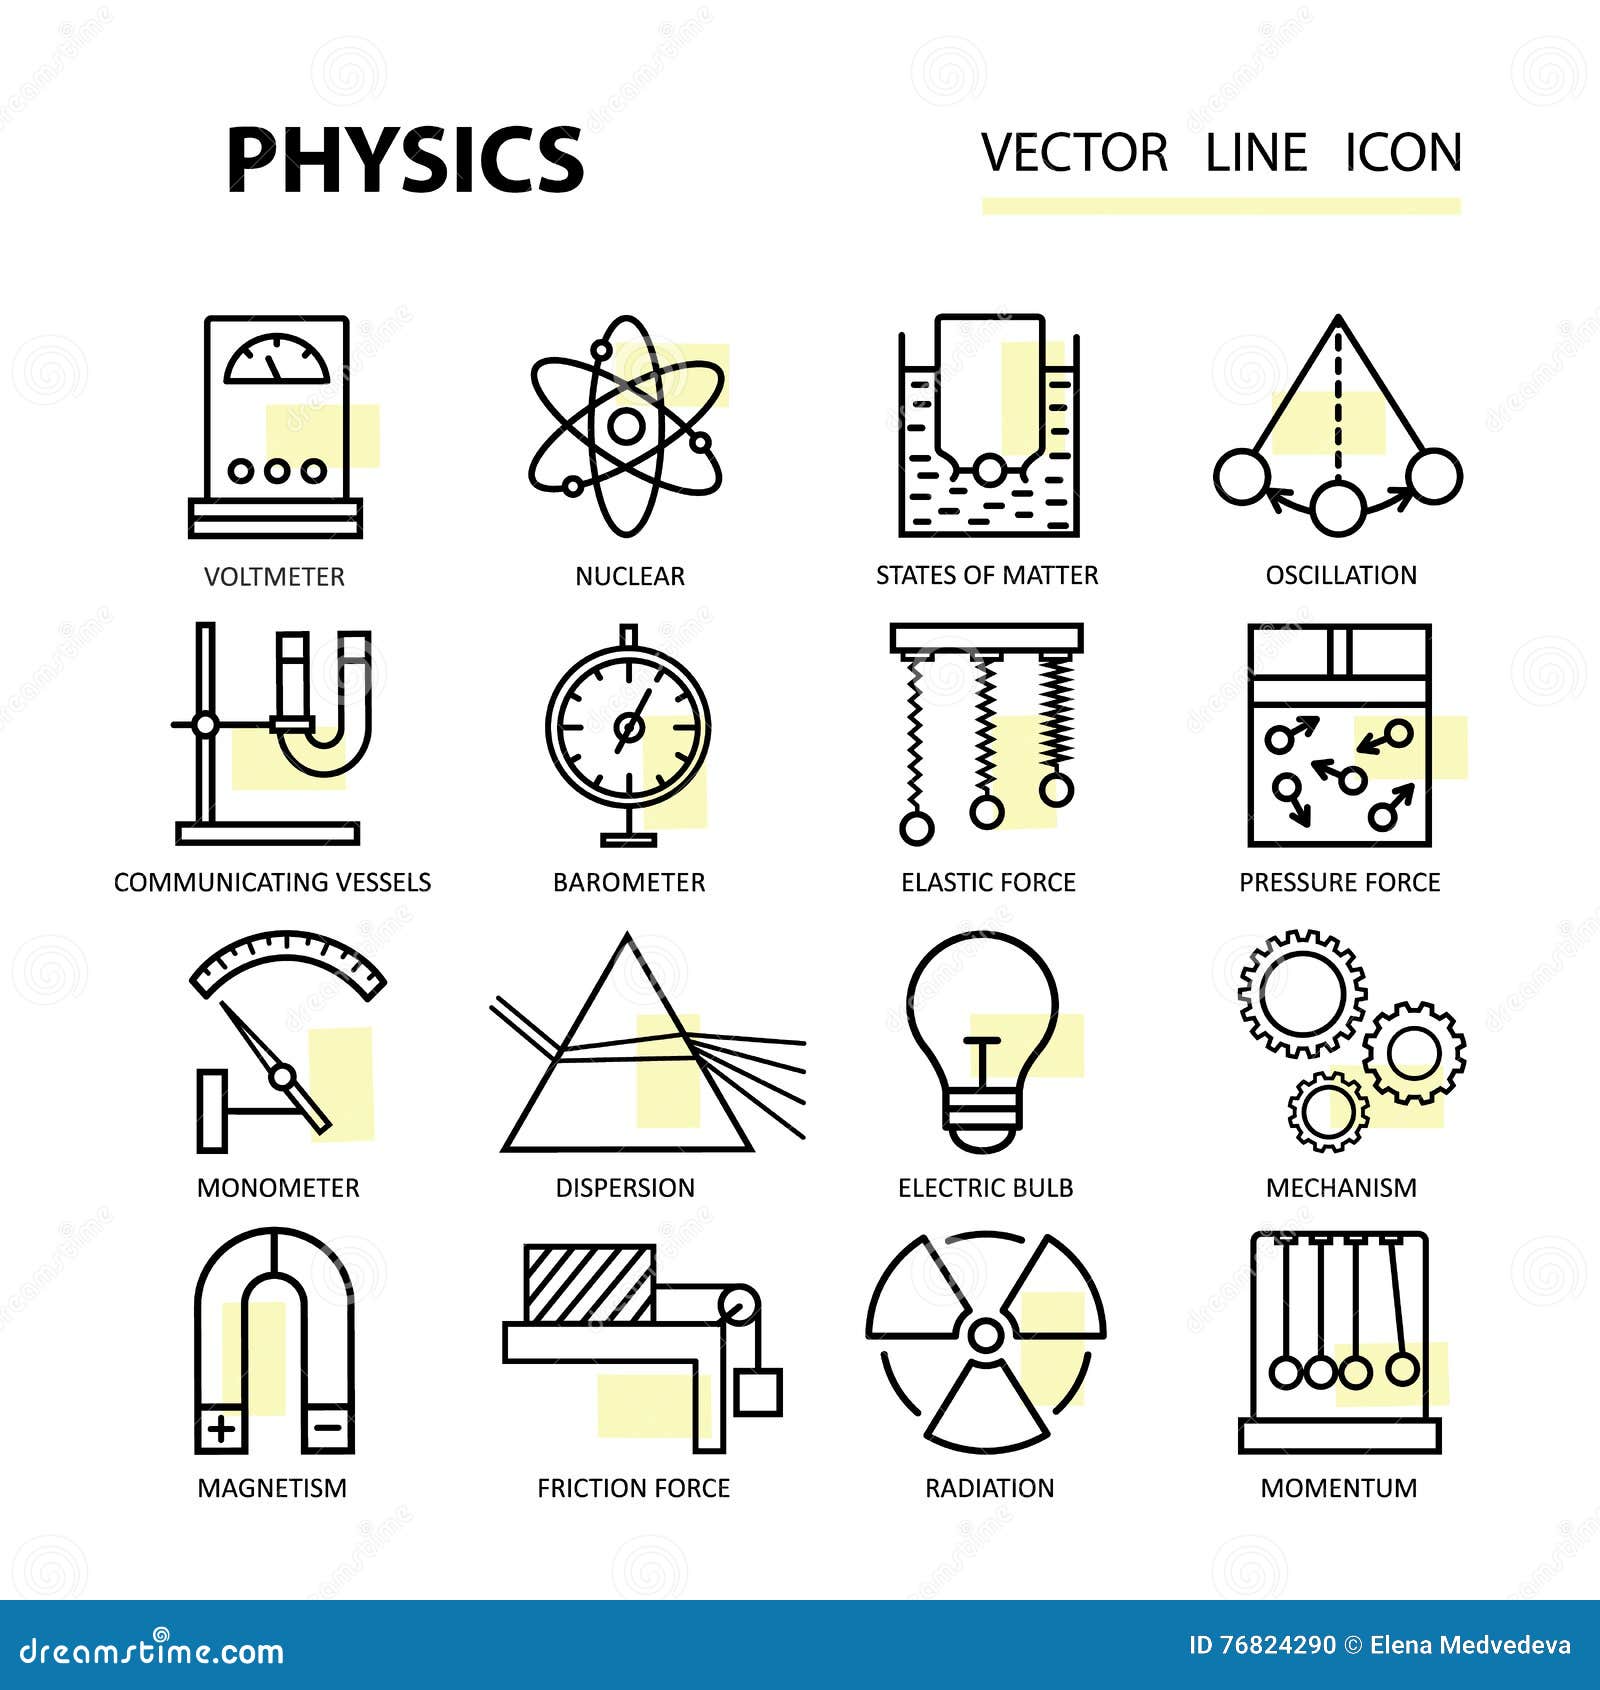 List of Basic Physics Terms | YourDictionary